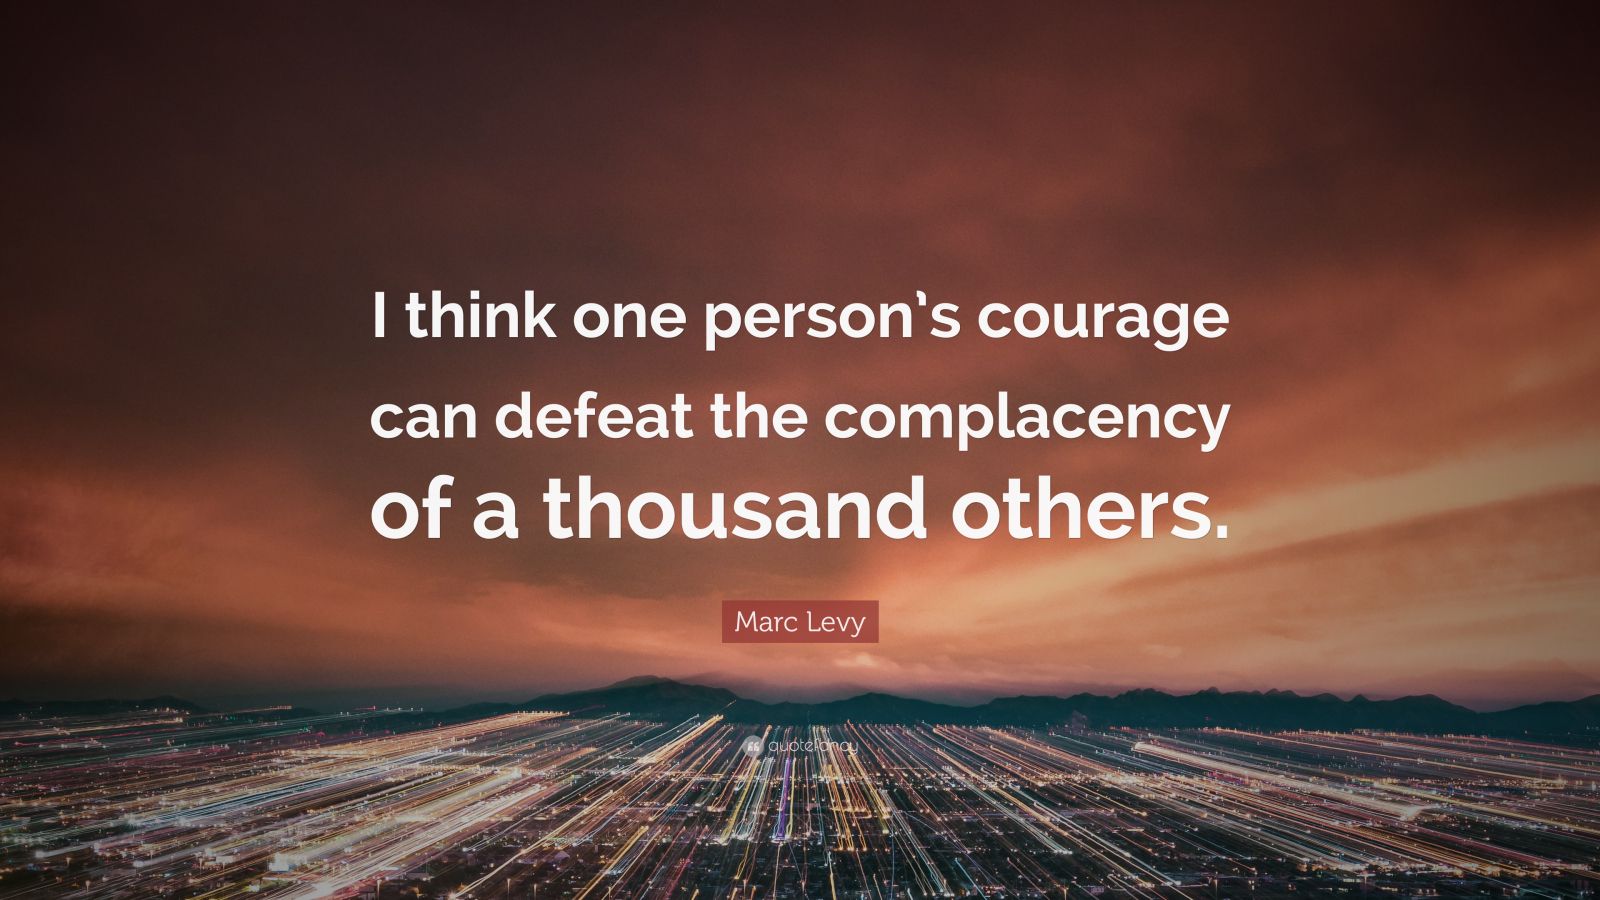 Marc Levy Quote: “I think one person’s courage can defeat the ...